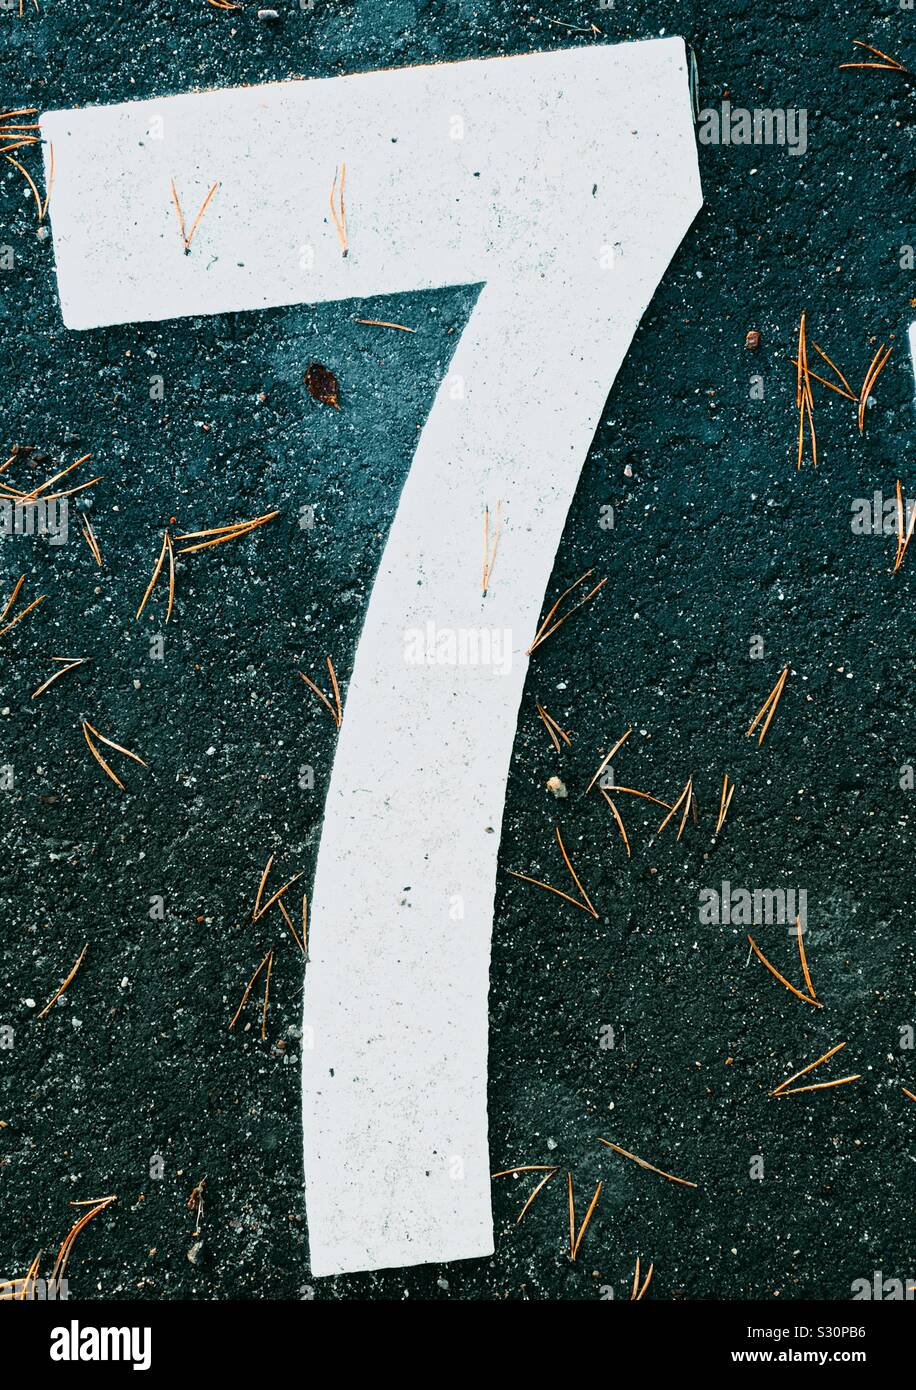 Giant white oversized number seven on ground Stock Photo